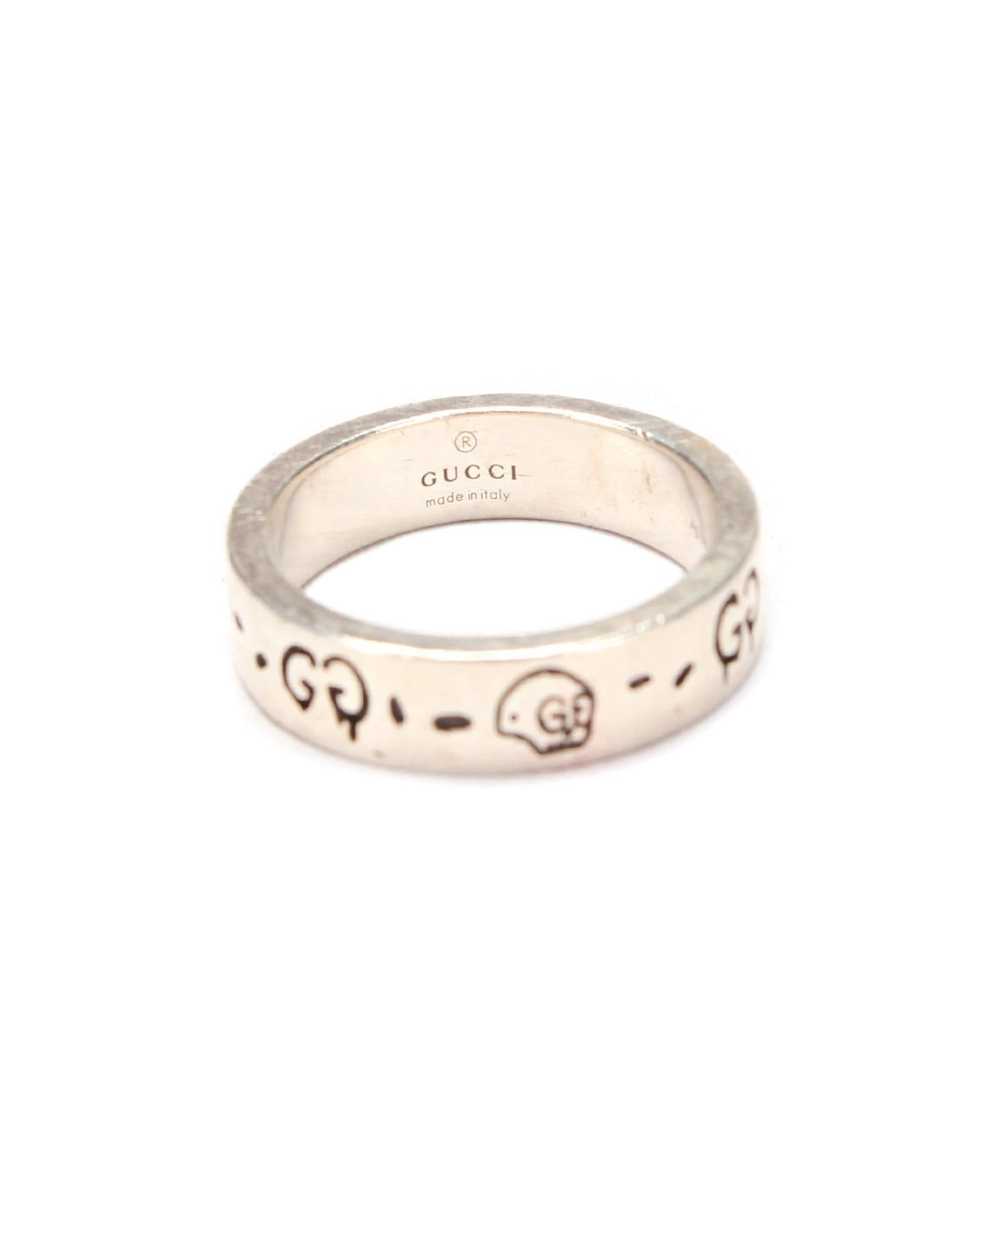 Gucci GUCCI Women's Silver Ghost Icon Ring in Sil… - image 5